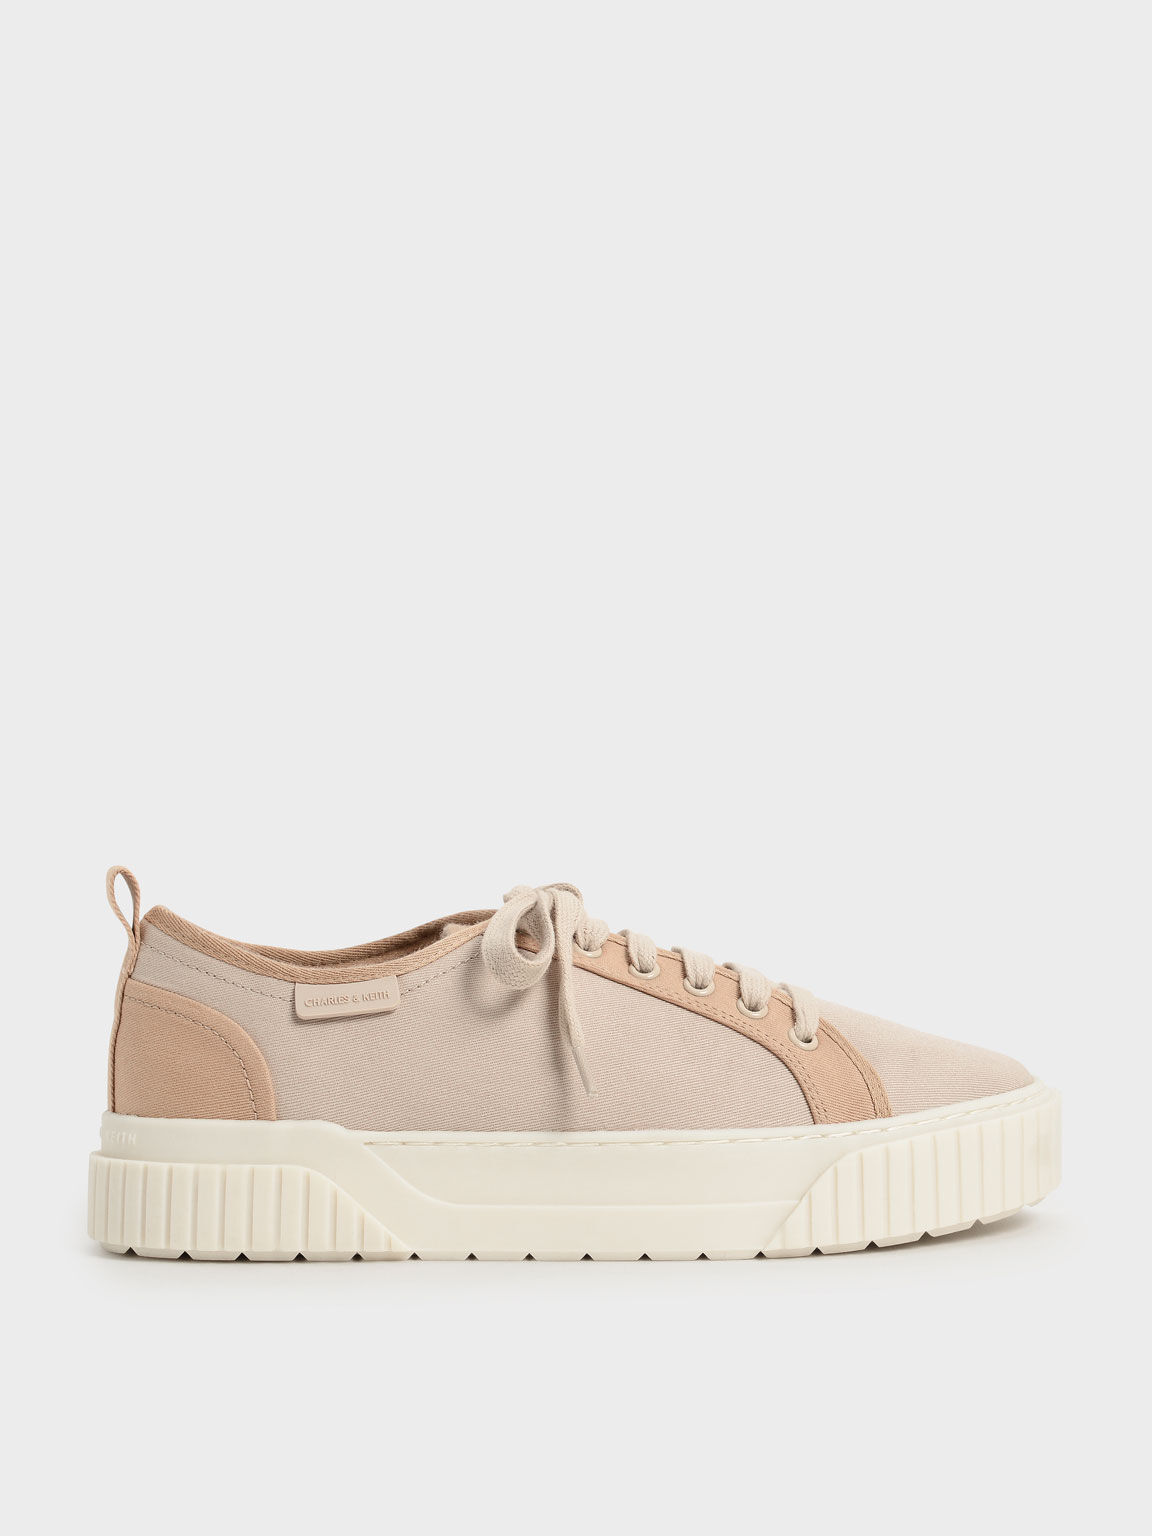 Cotton Low-Top Sneakers, Sand, hi-res